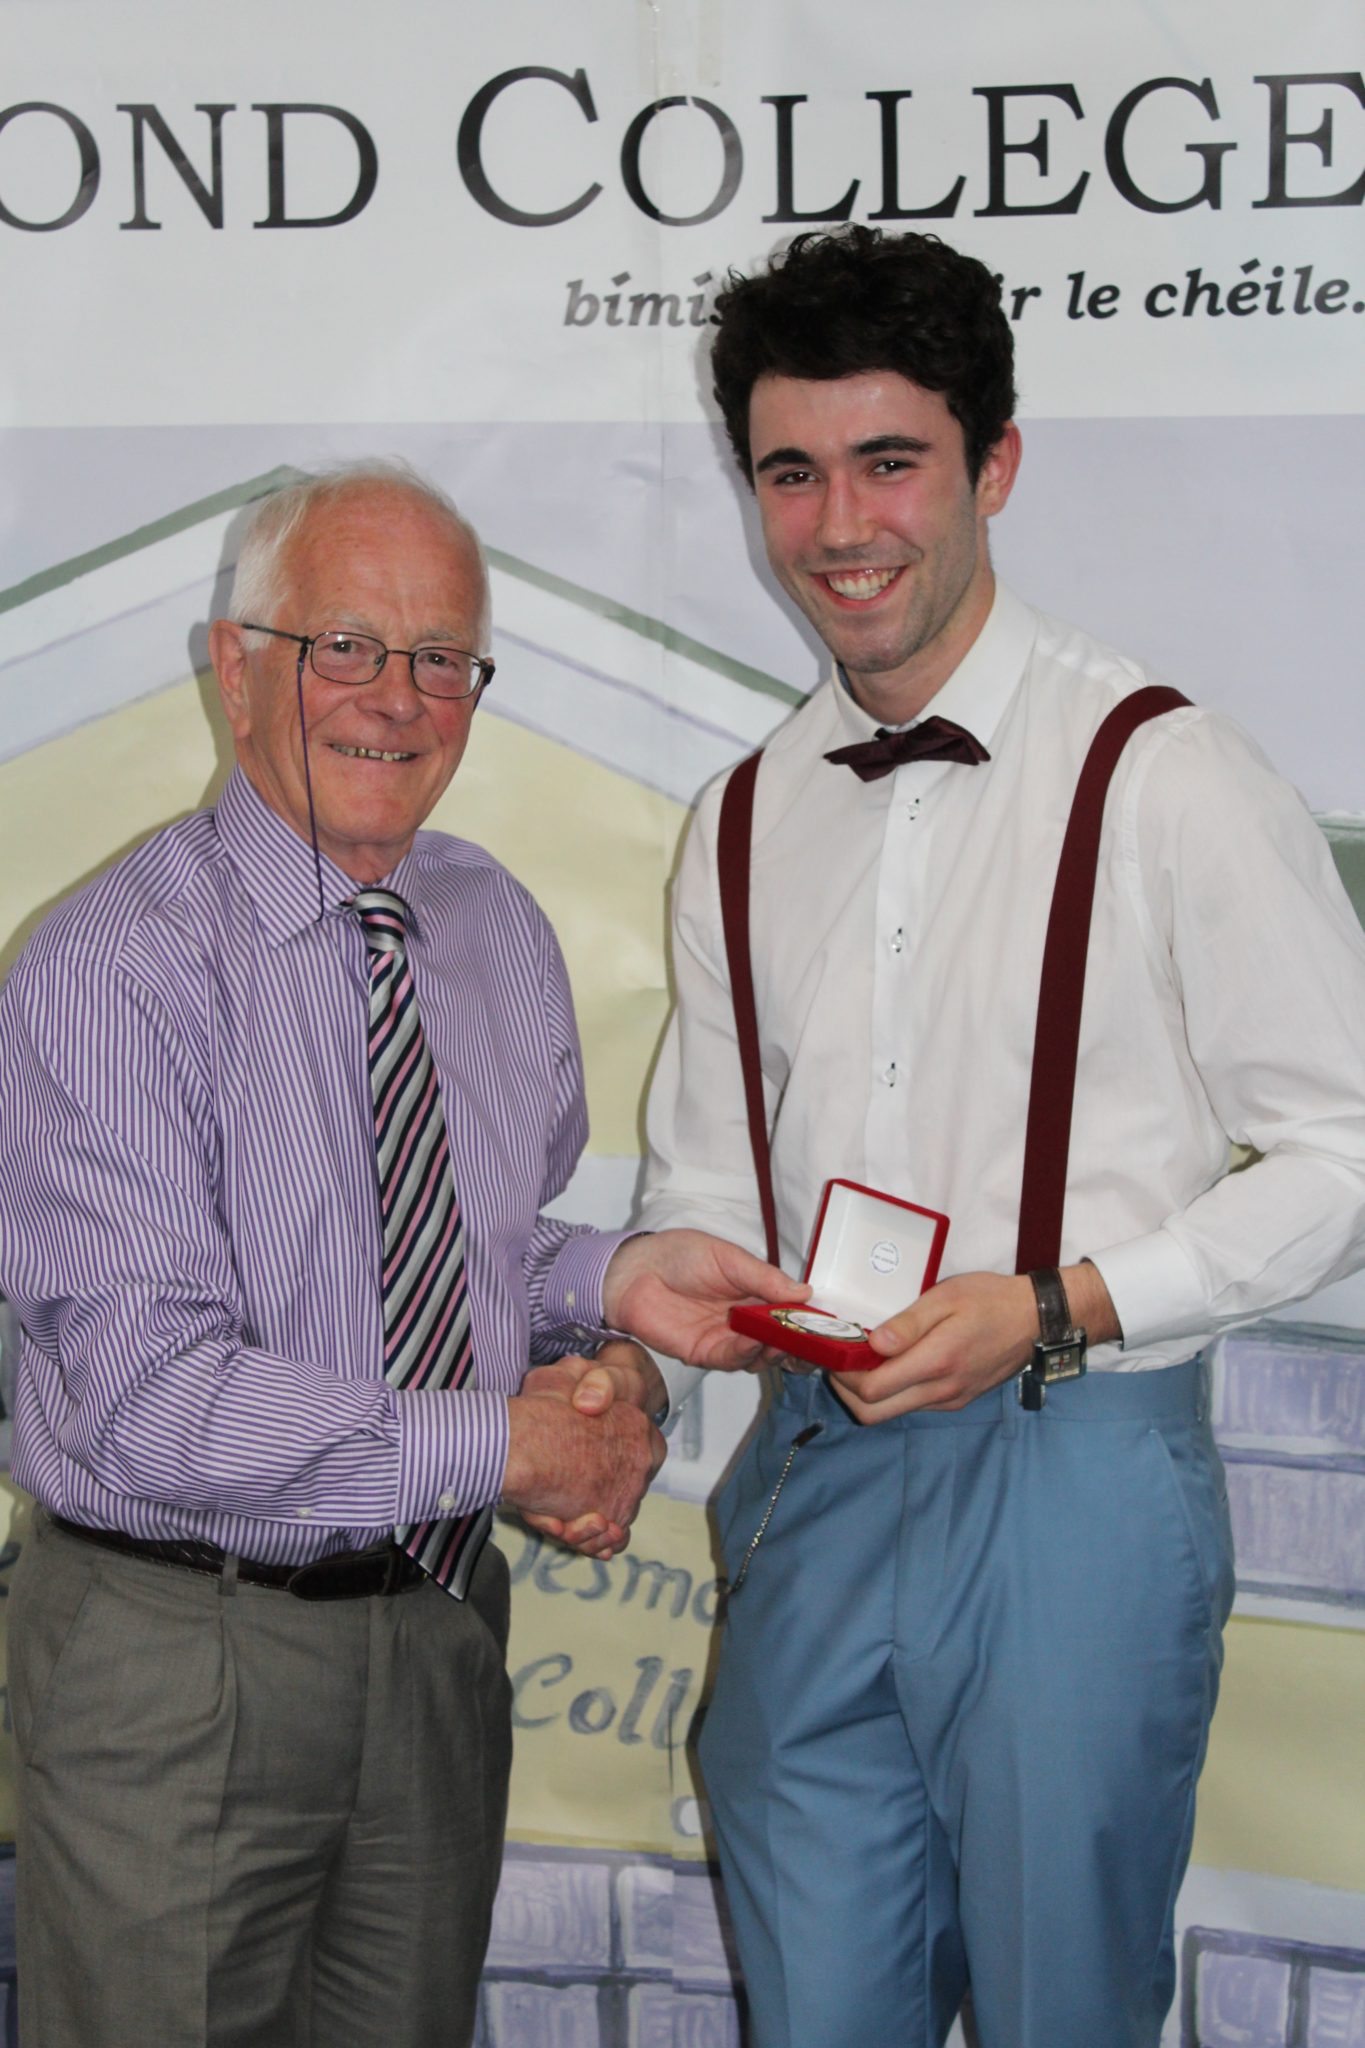 Desmond College Leaving Certificate Graduation Awards 2015: Sports Awards: Cormac Long with Mike Nash